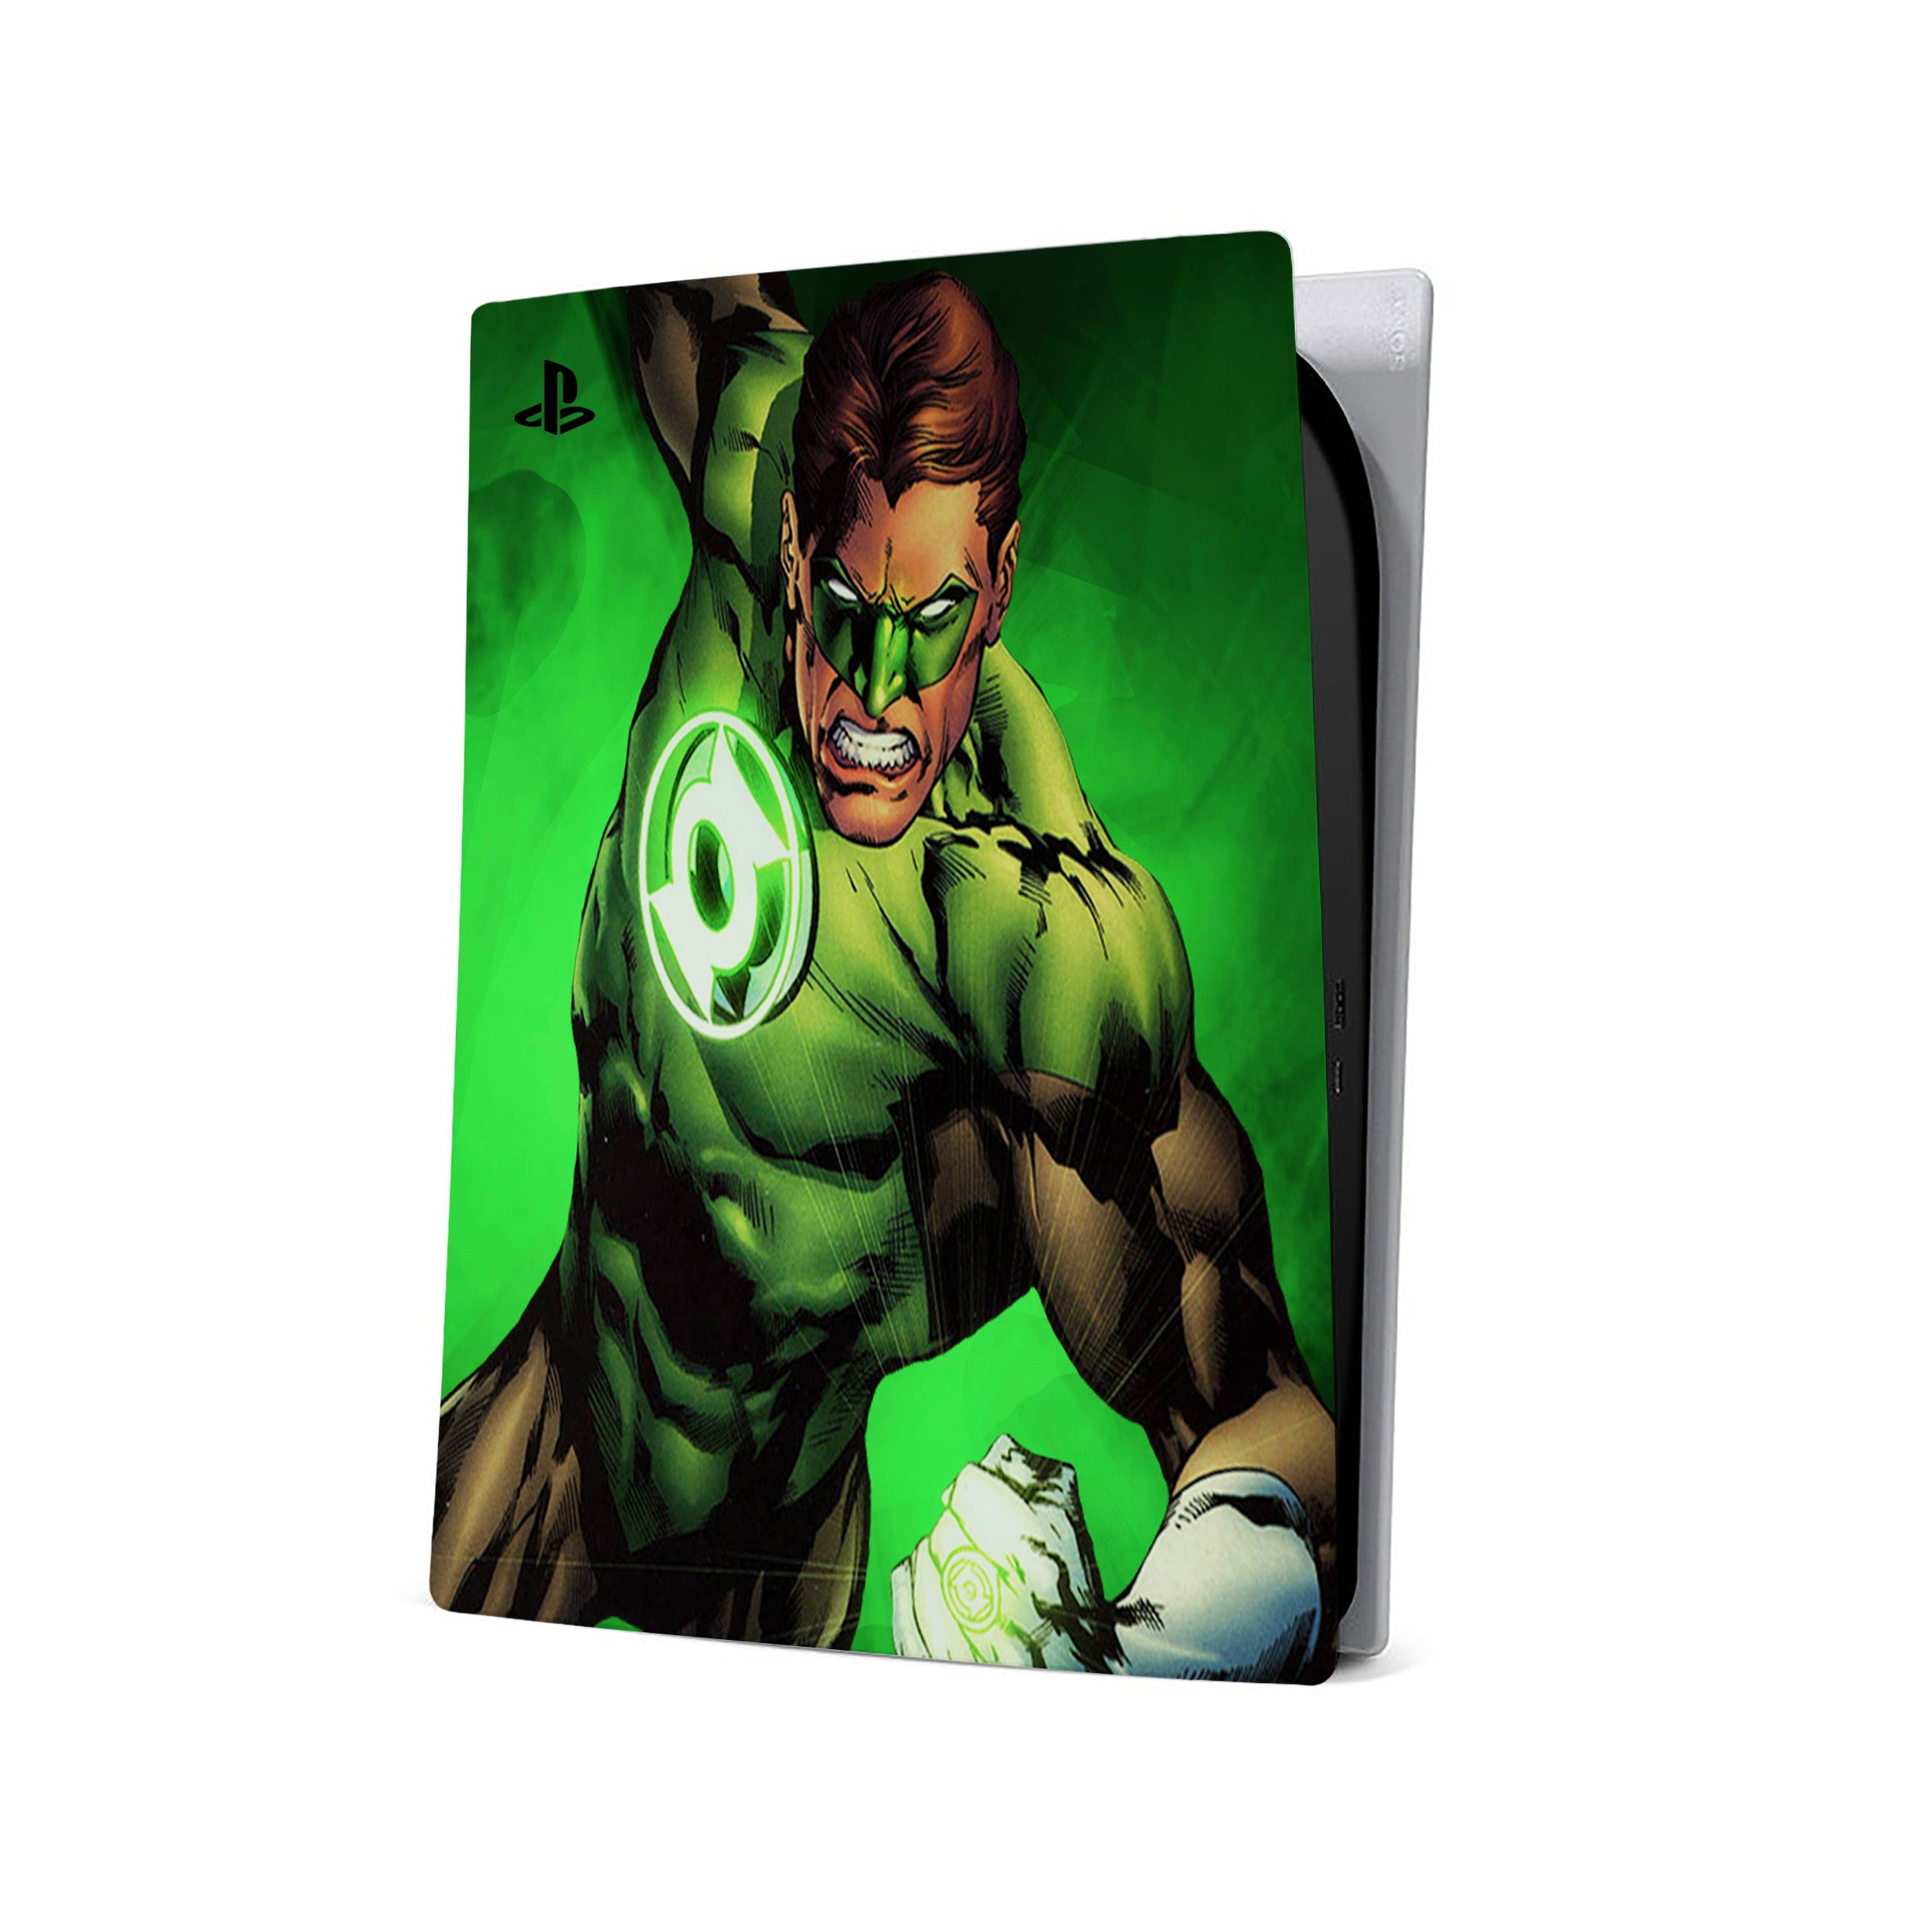 A video game skin featuring a Marvel Green Lantern design for the PS5.